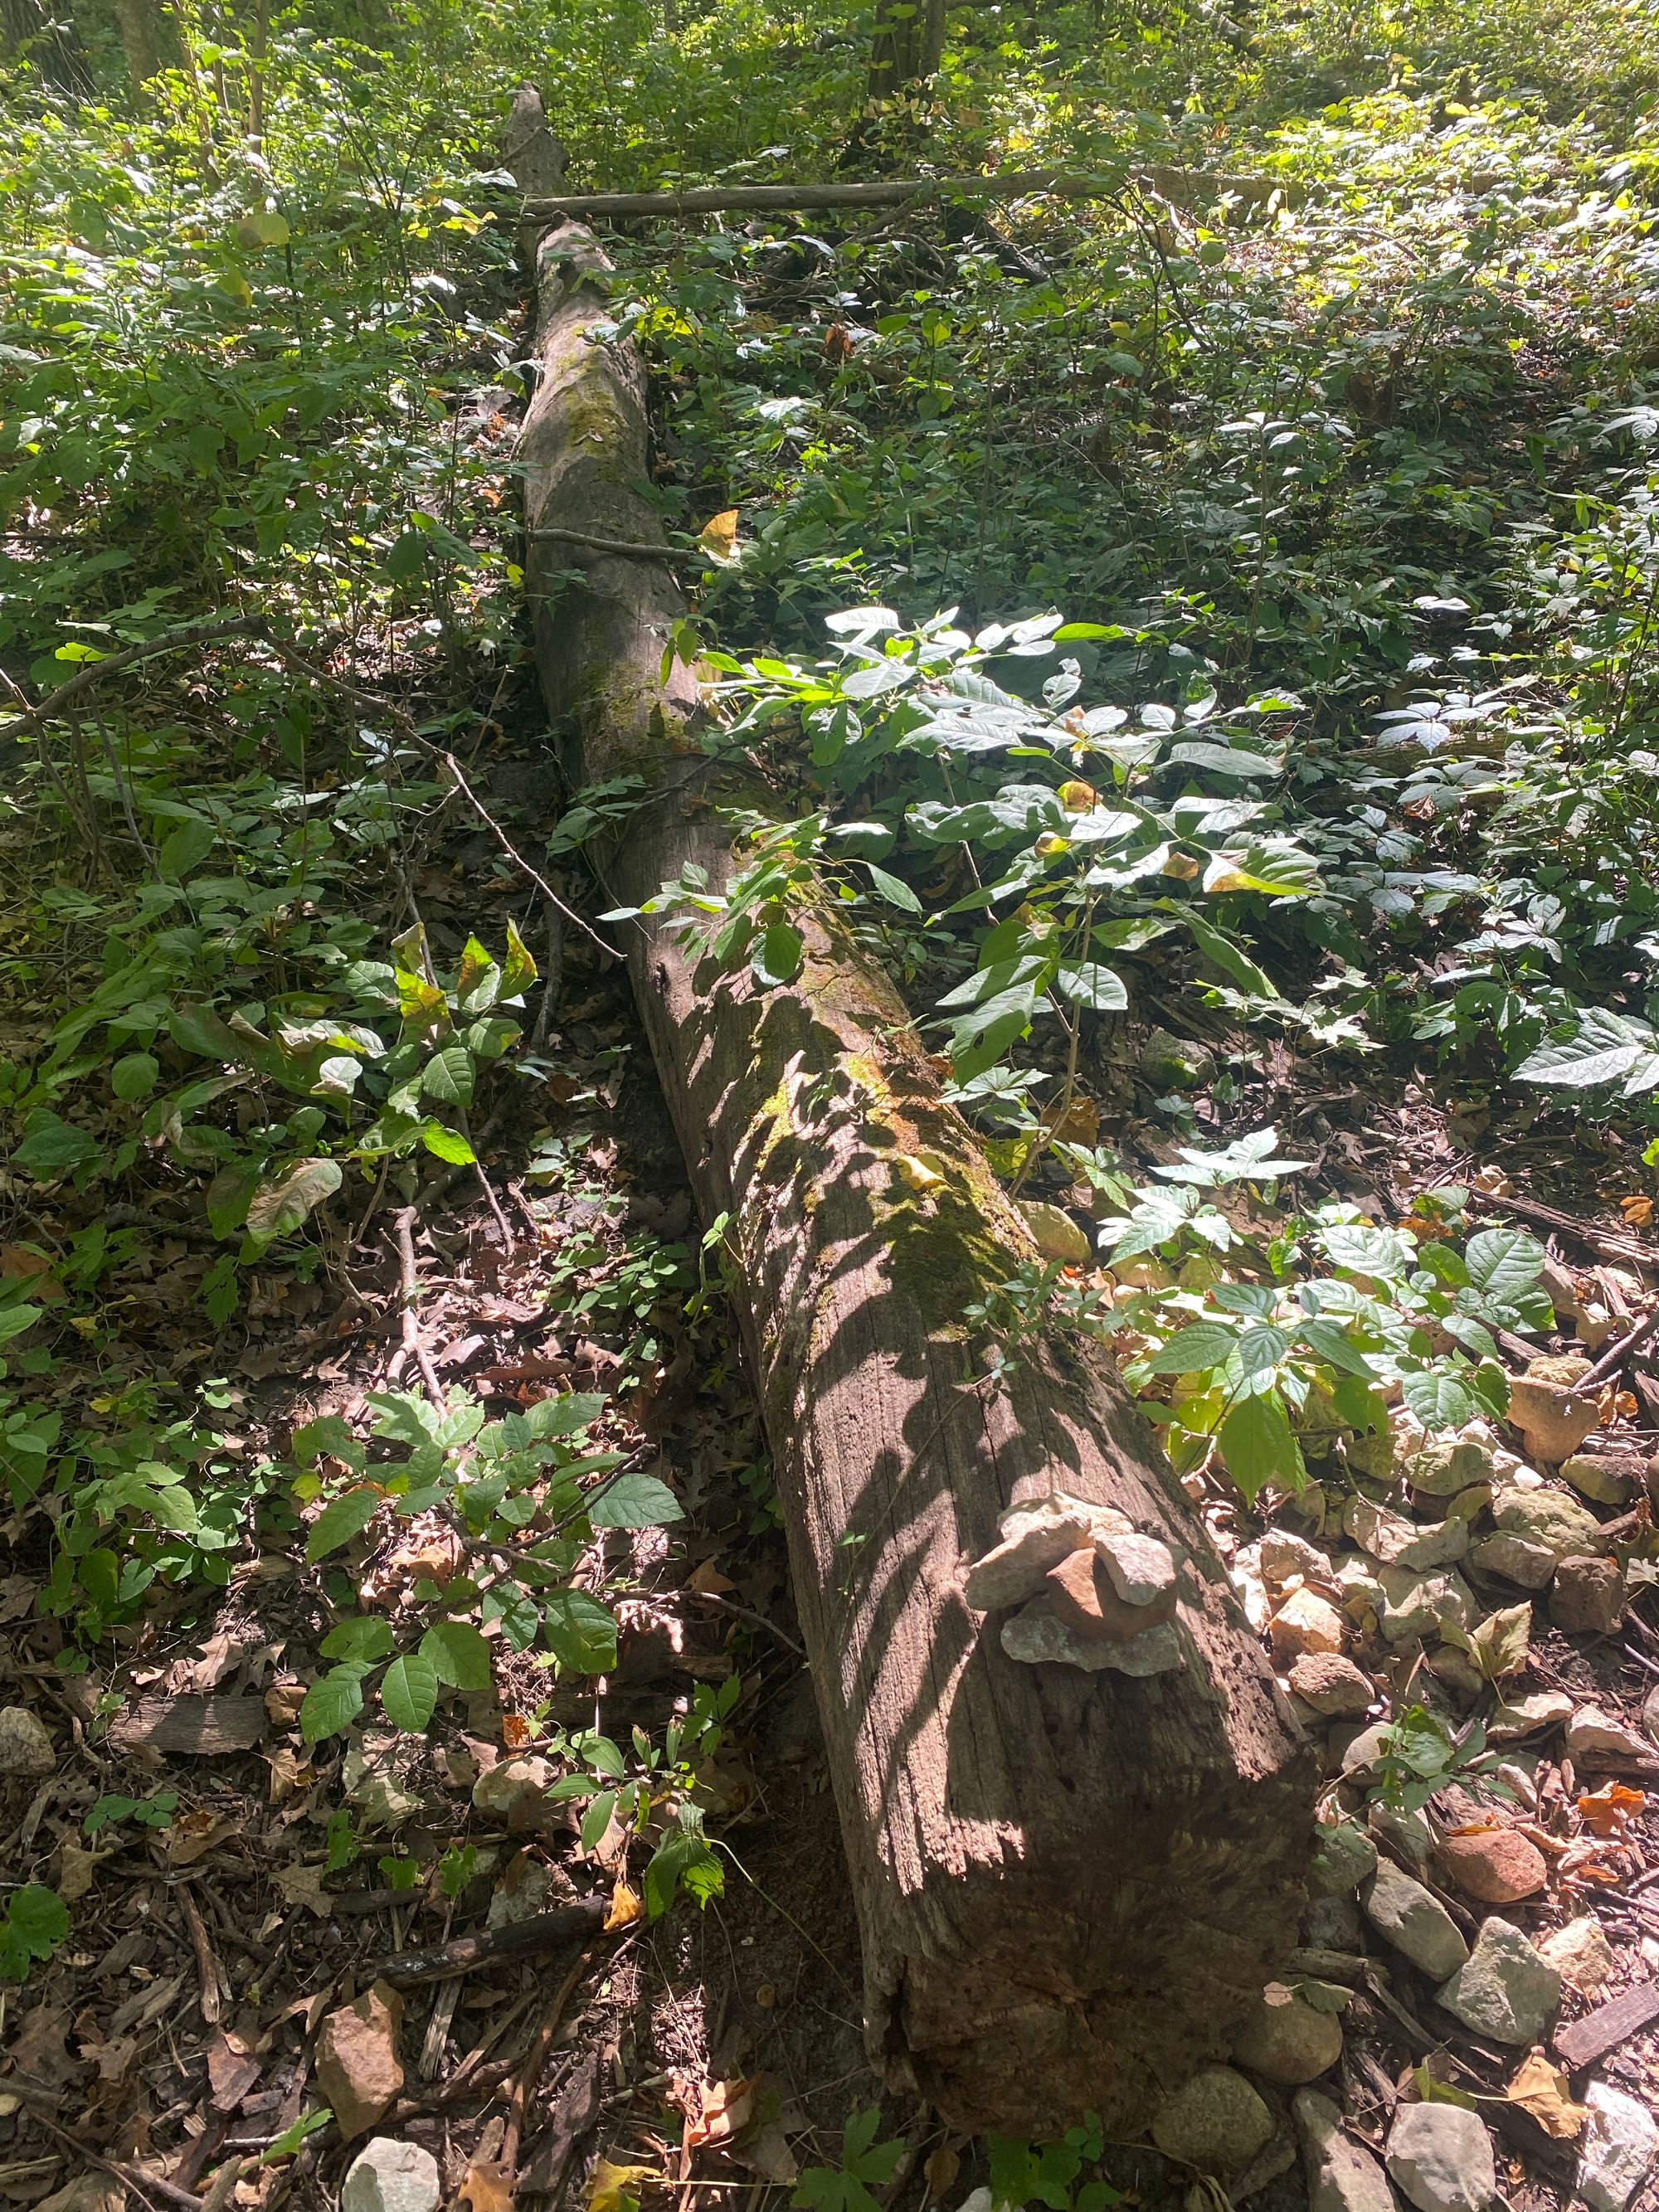 A large (approximately 20 feet long) log in a bed of stones and brush. Leaves cast shadows on the logs.